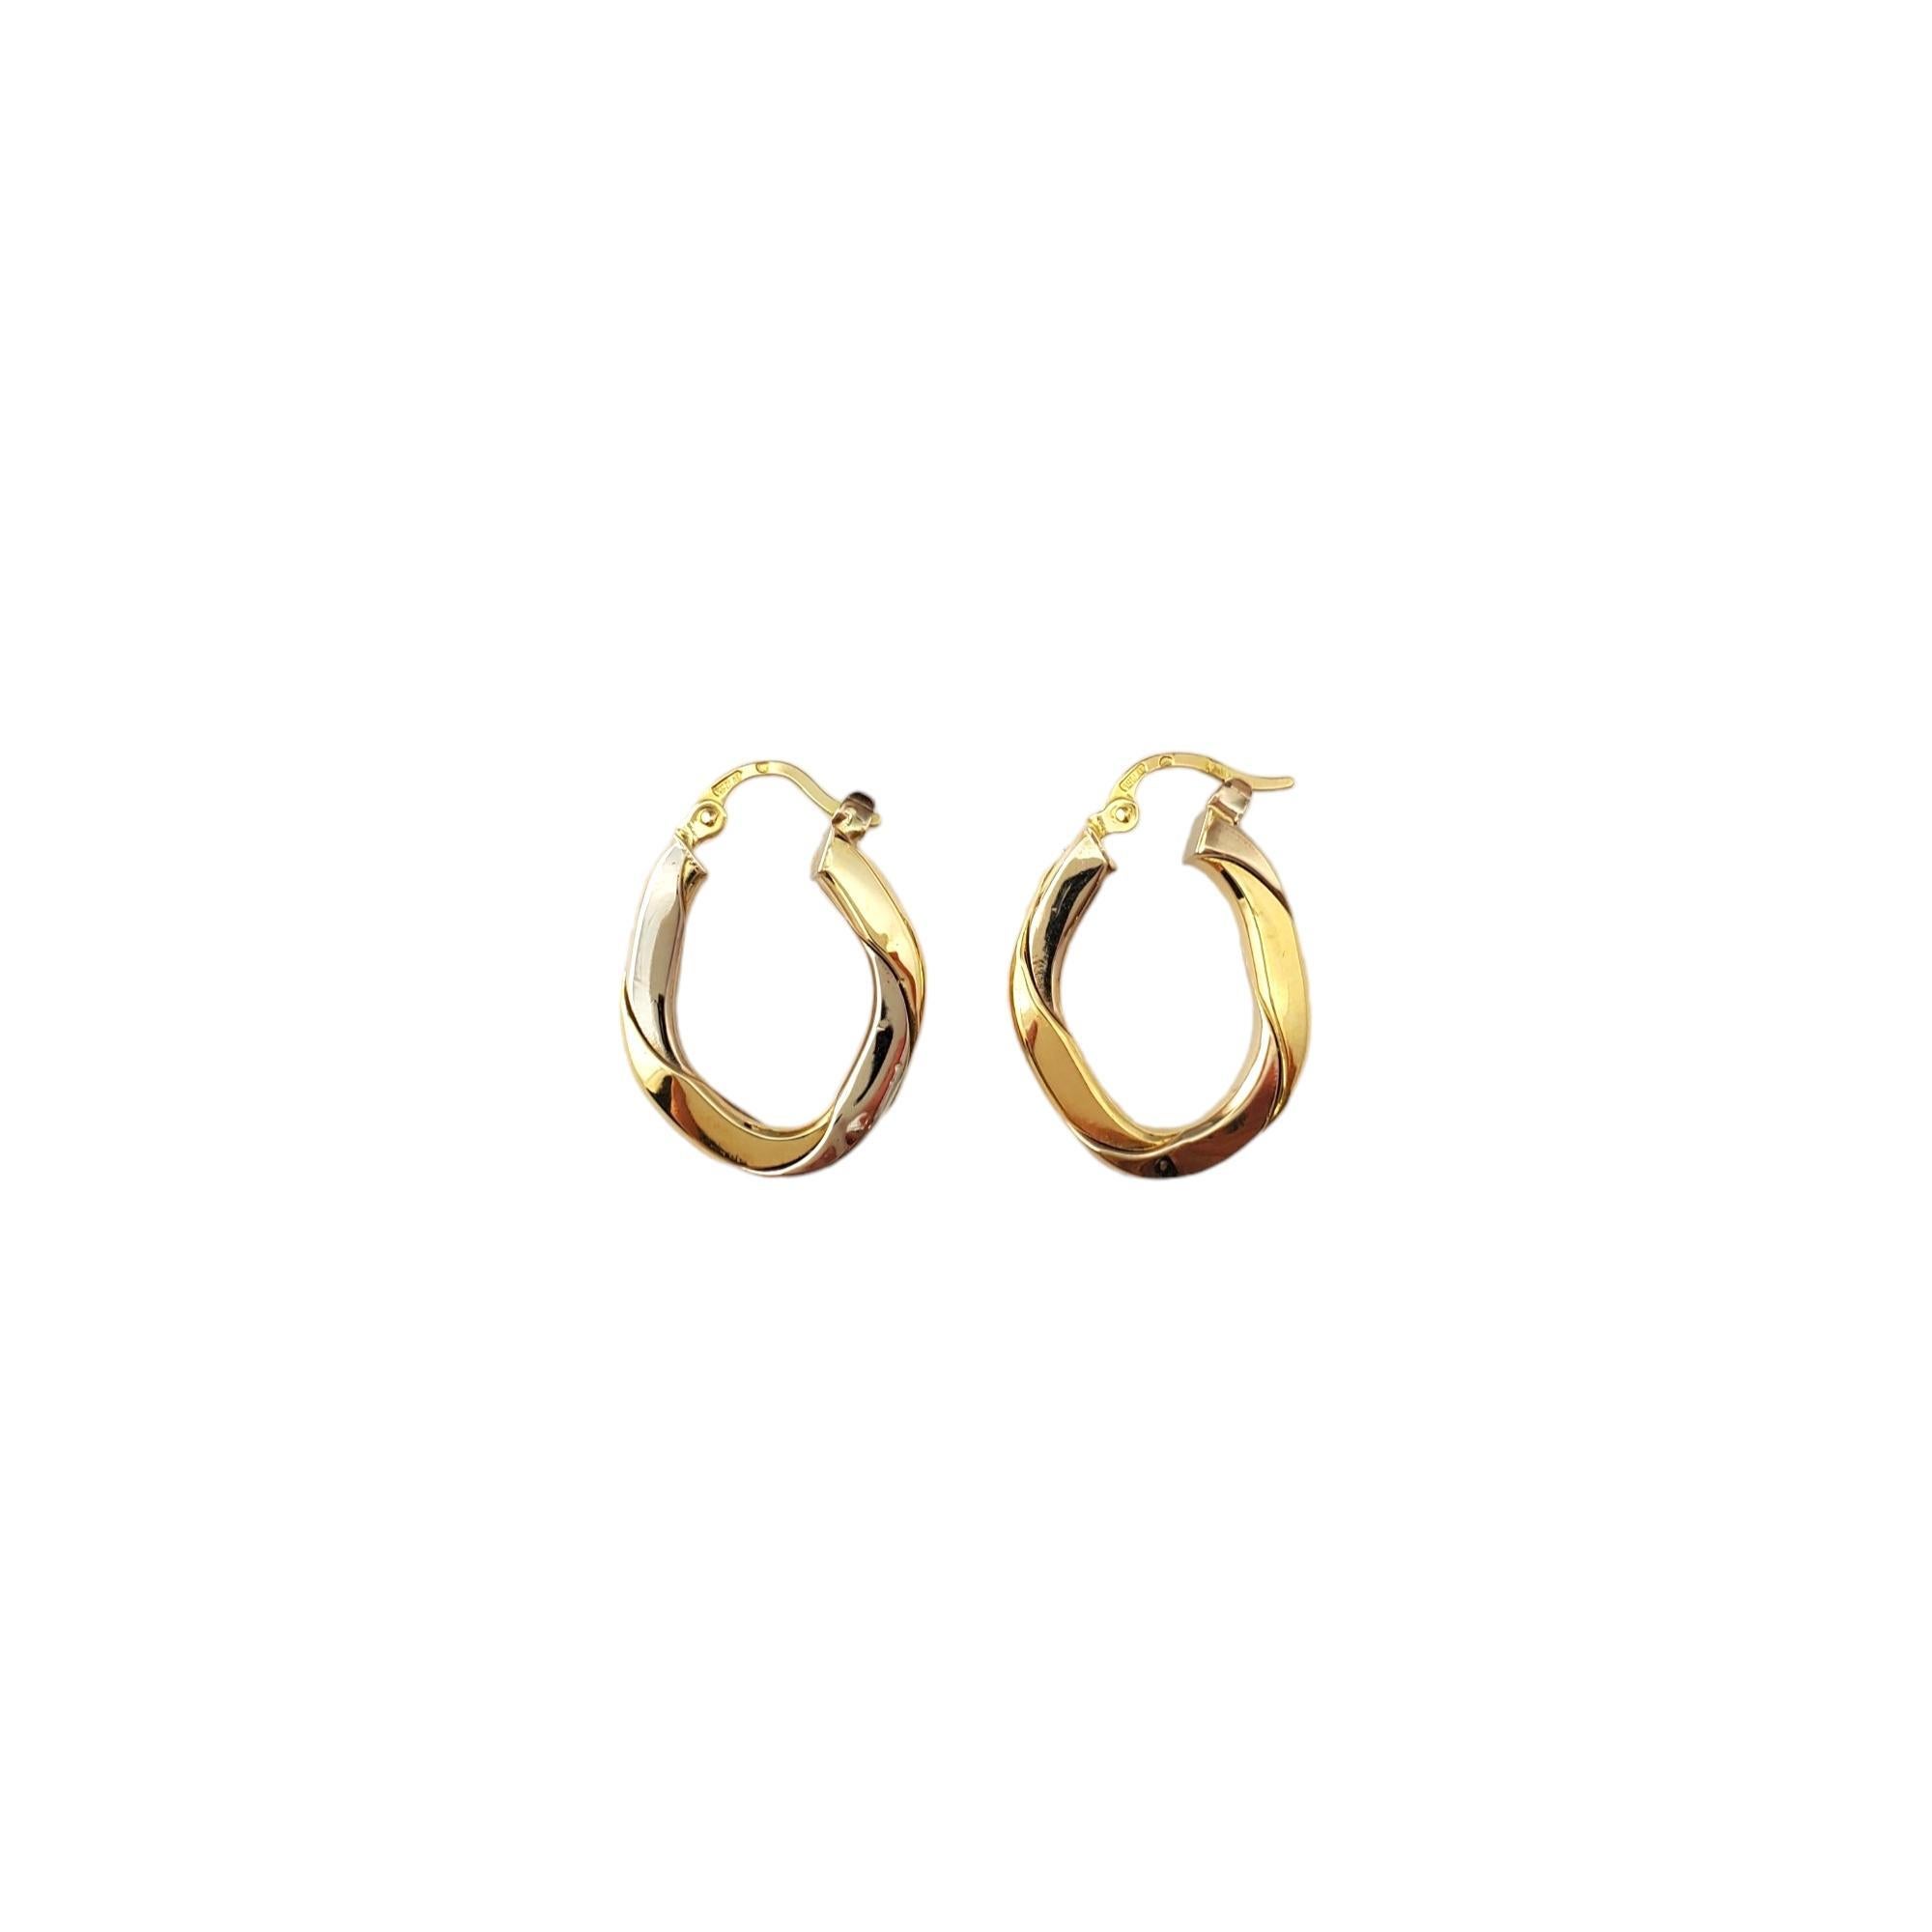 18K Yellow and White Gold Oval Hoop Earrings 

These gorgeous earrings are a staple to your collection. 

Size: 24.4mm X 3.5mm X 3.1mm

Weight: 2.2dwt. / 3.5 gr.

Marked: 750

Very good condition, professionally polished.

Will come packaged in a